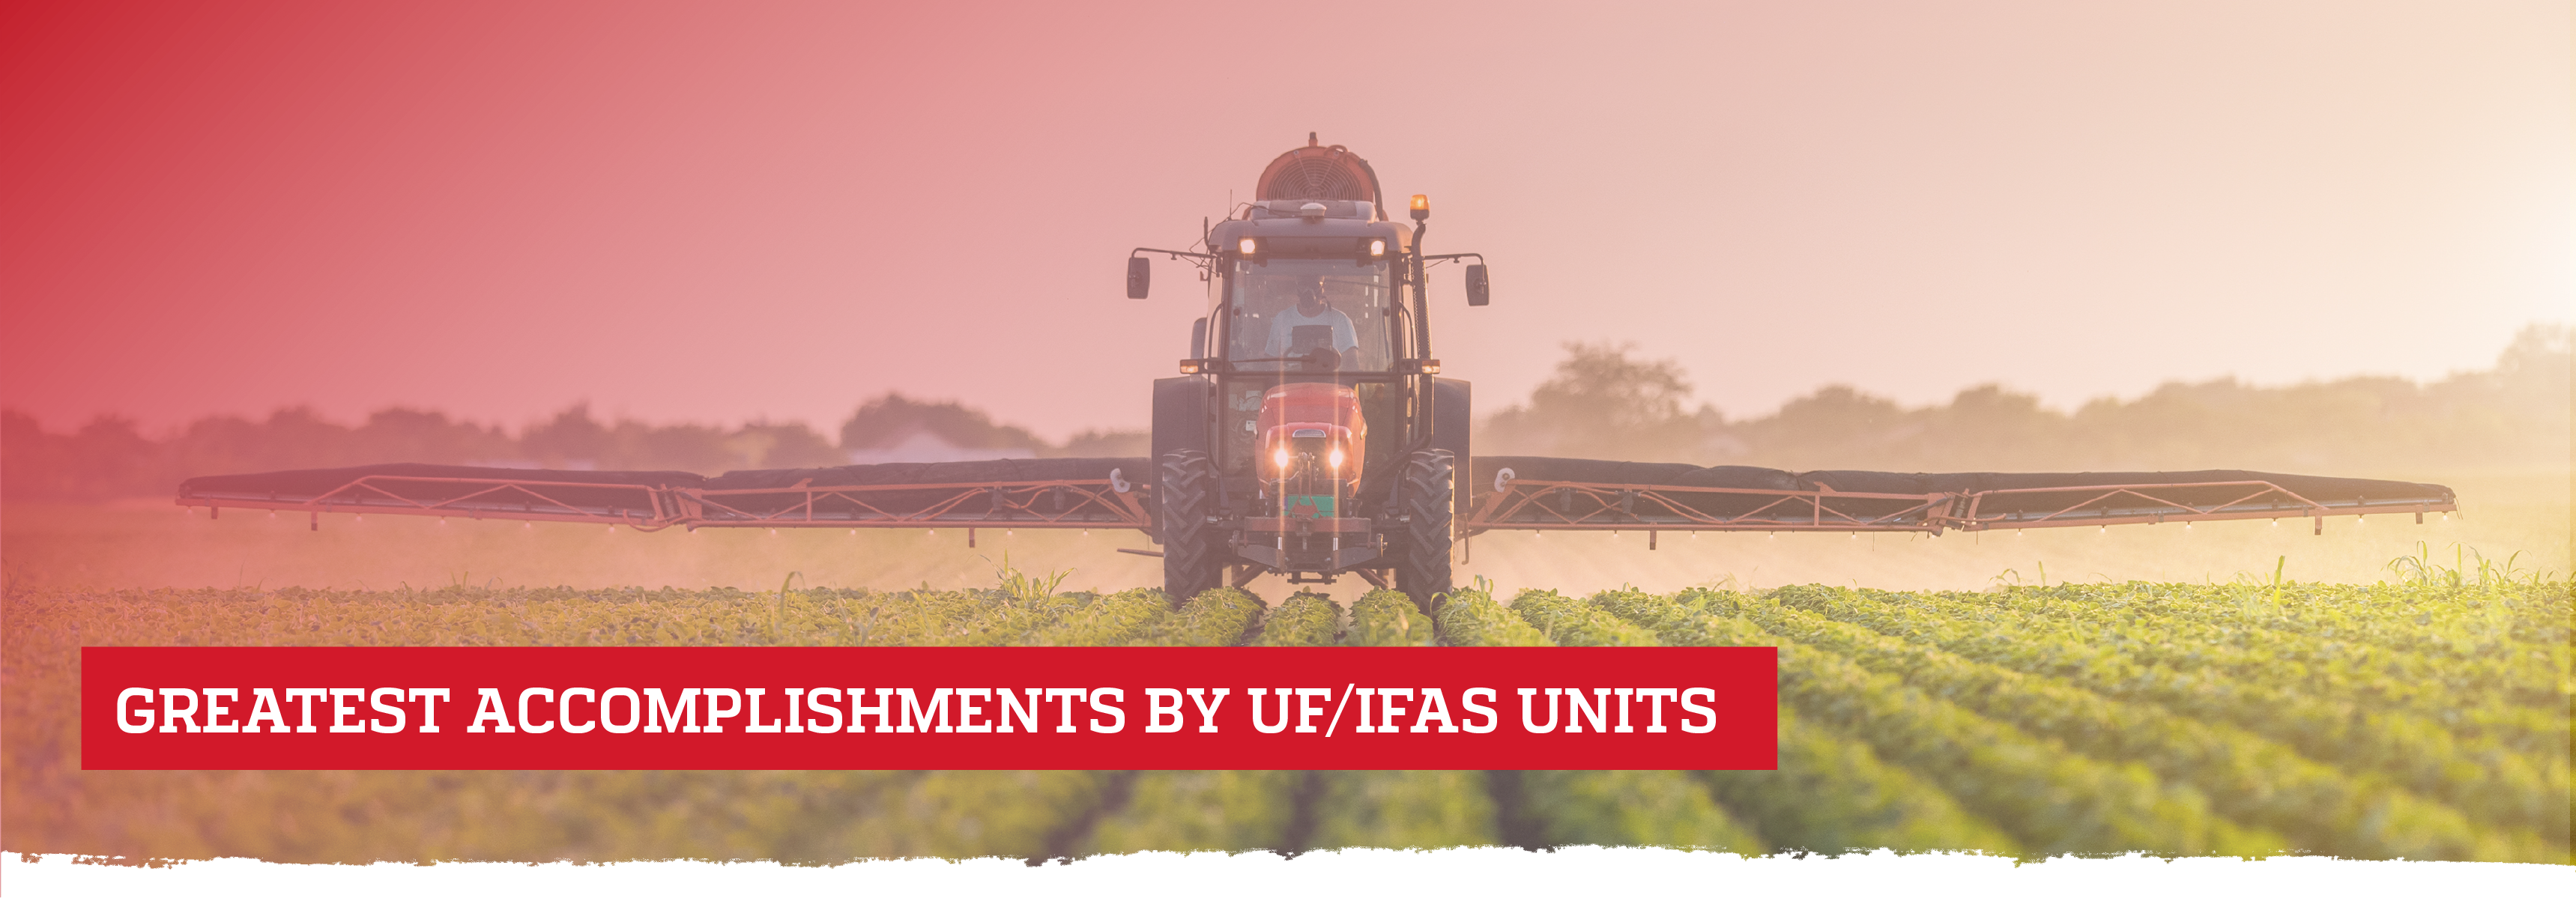 Greatest accomplishments by UF/IFAS units; Photo of tractor spraying field